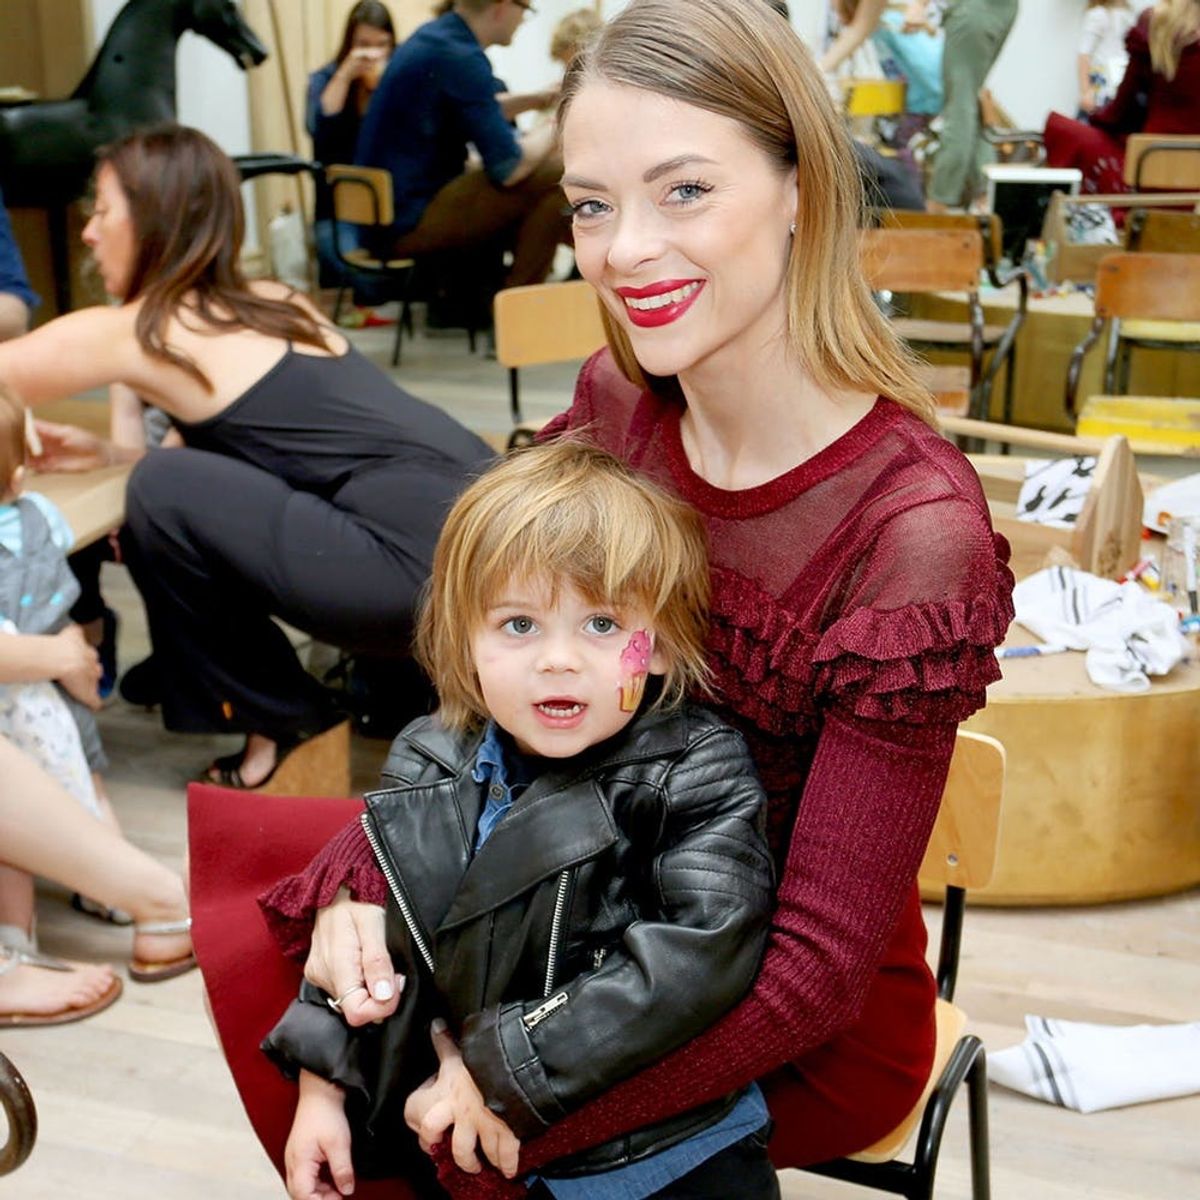 Jaime King Is Launching a Gender Neutral Kids’ Clothing Line